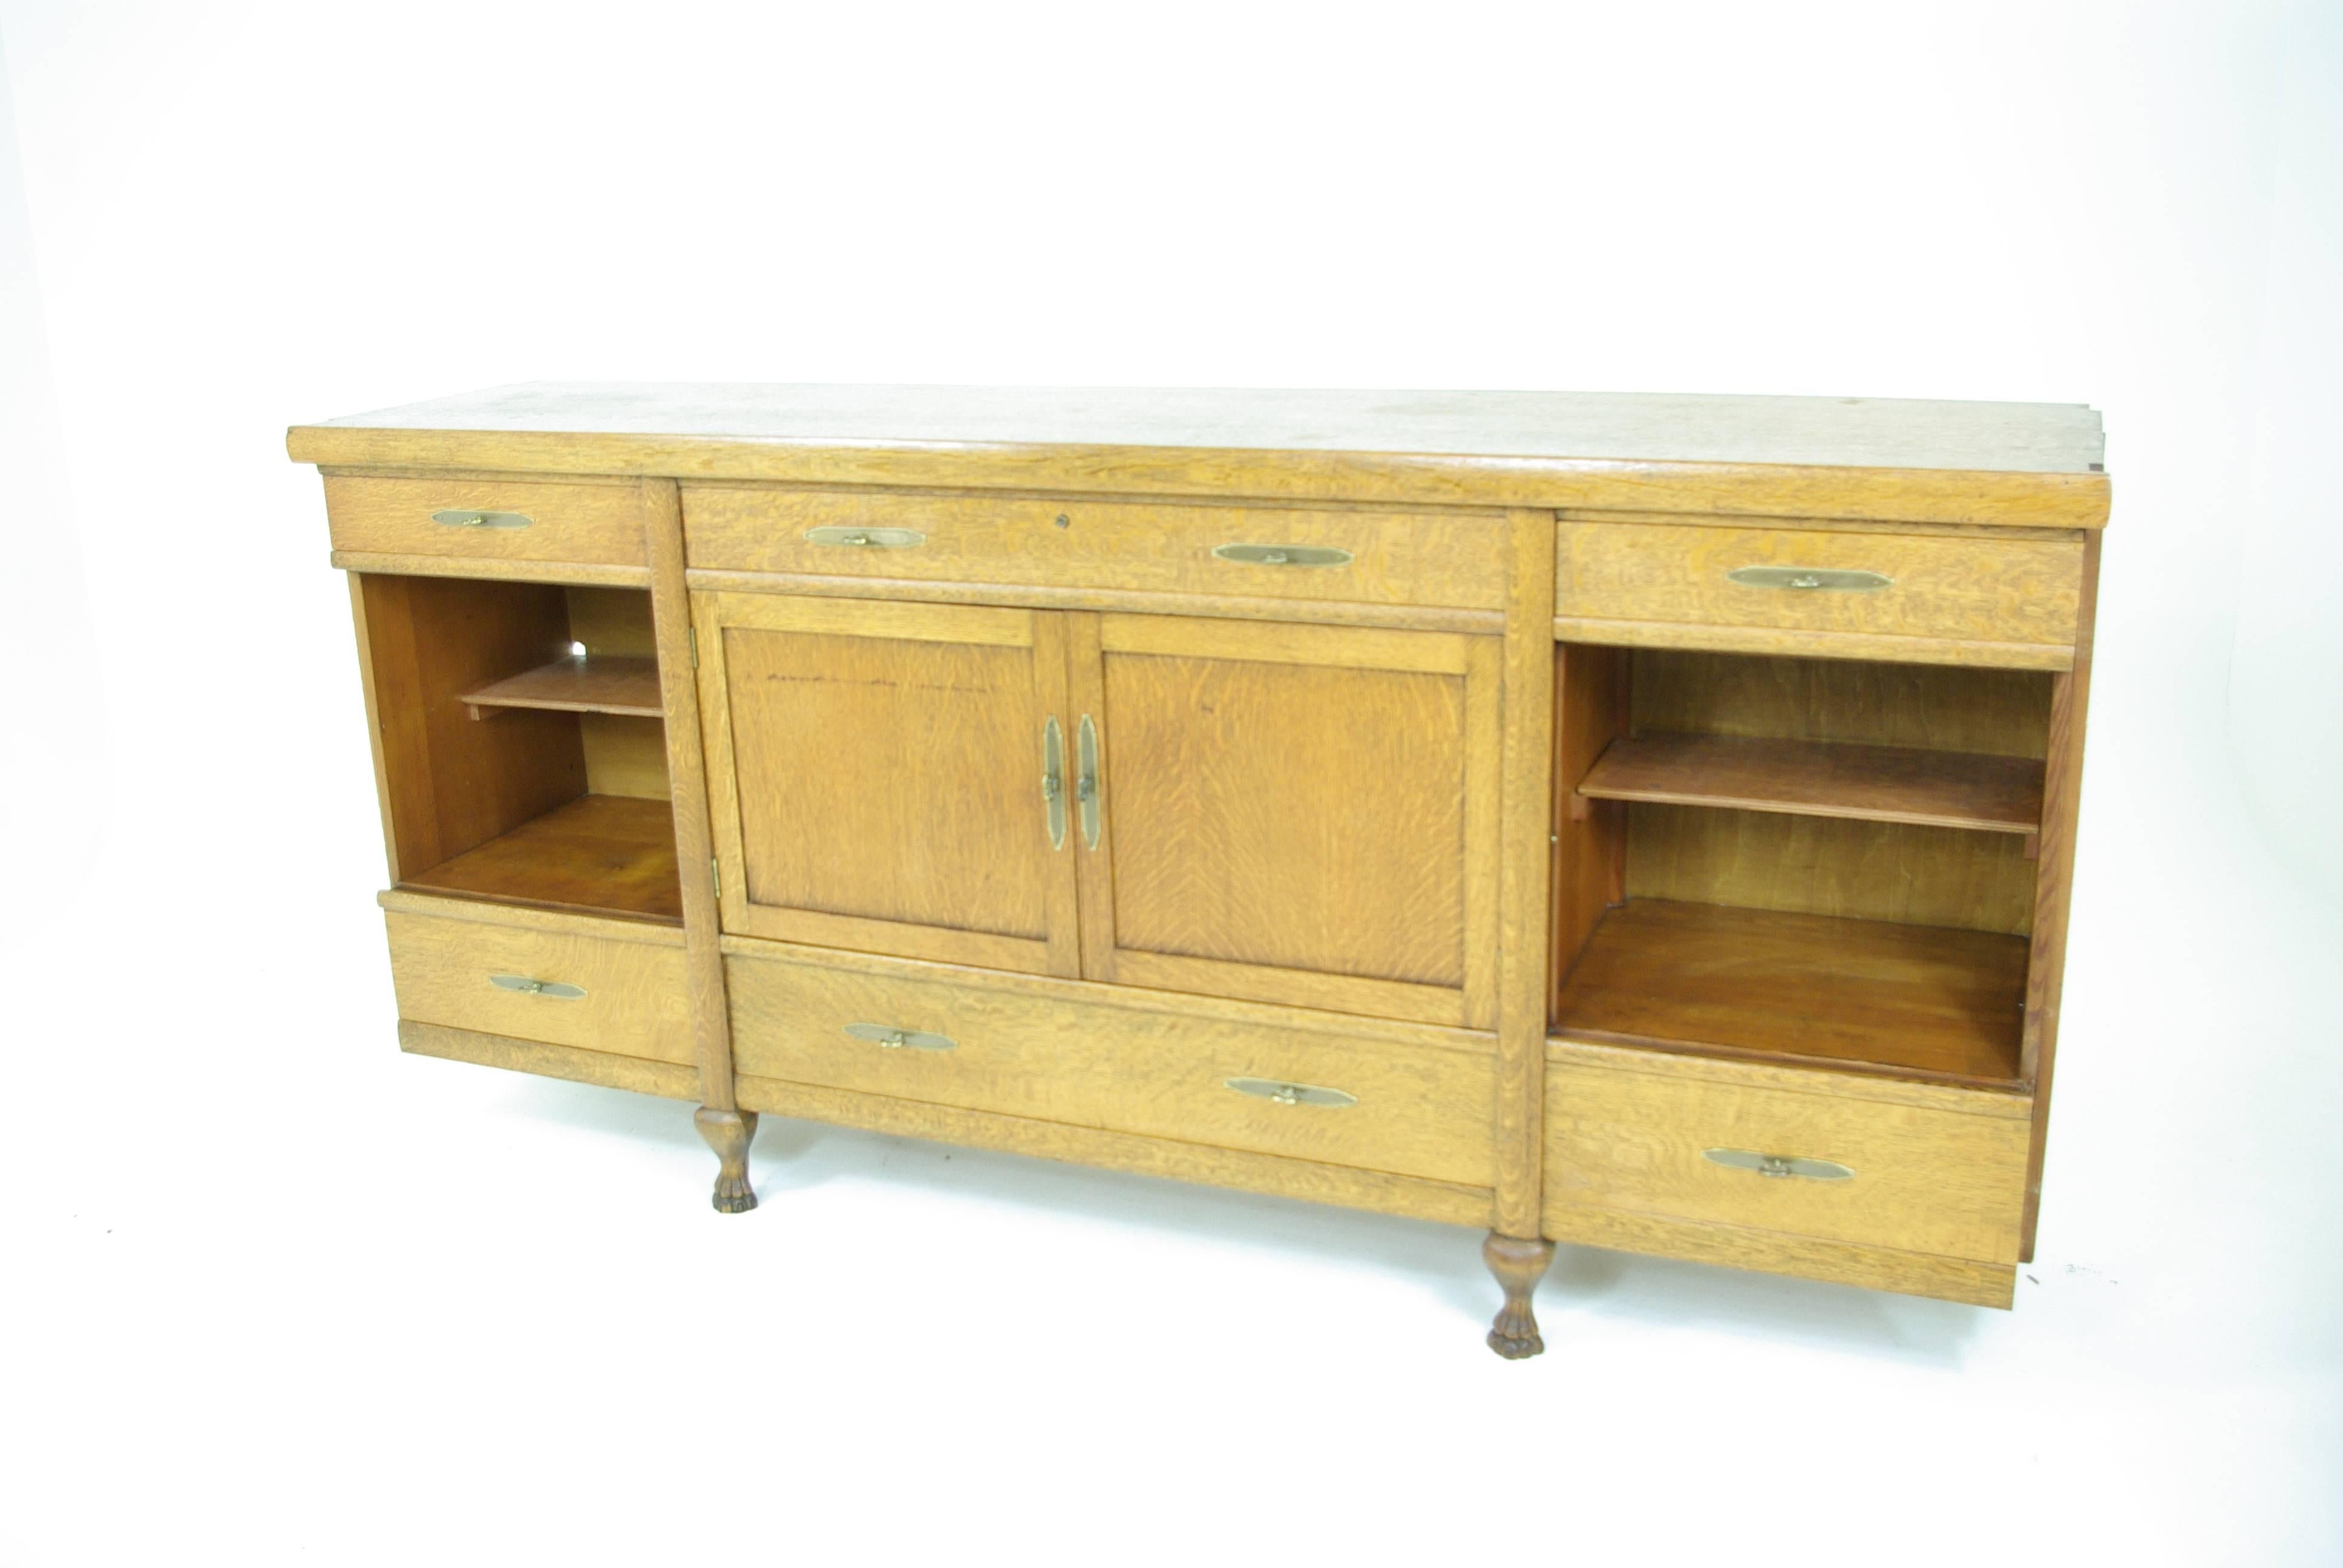 America, 1910.
All original tiger oak construction.
Stained glass original.
Separates into three pieces.
Central sideboard with drawers and cupboards.
Flanked by China, cabinets with three adjustable shelves ending on claw feet.
All solid when